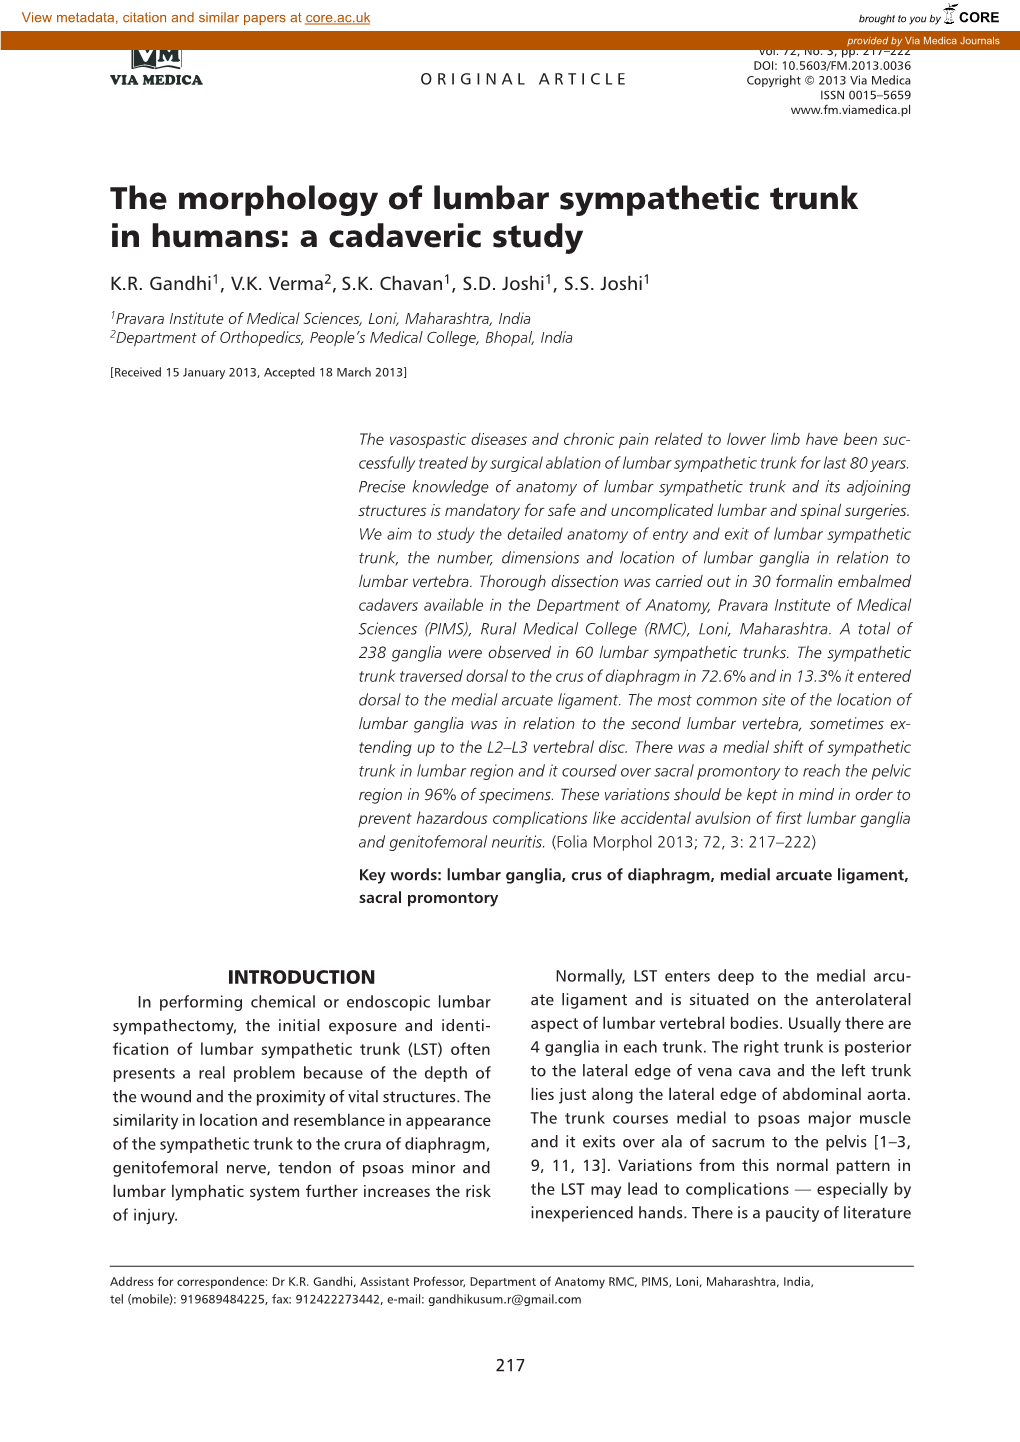 The Morphology of Lumbar Sympathetic Trunk in Humans: a Cadaveric Study K.R